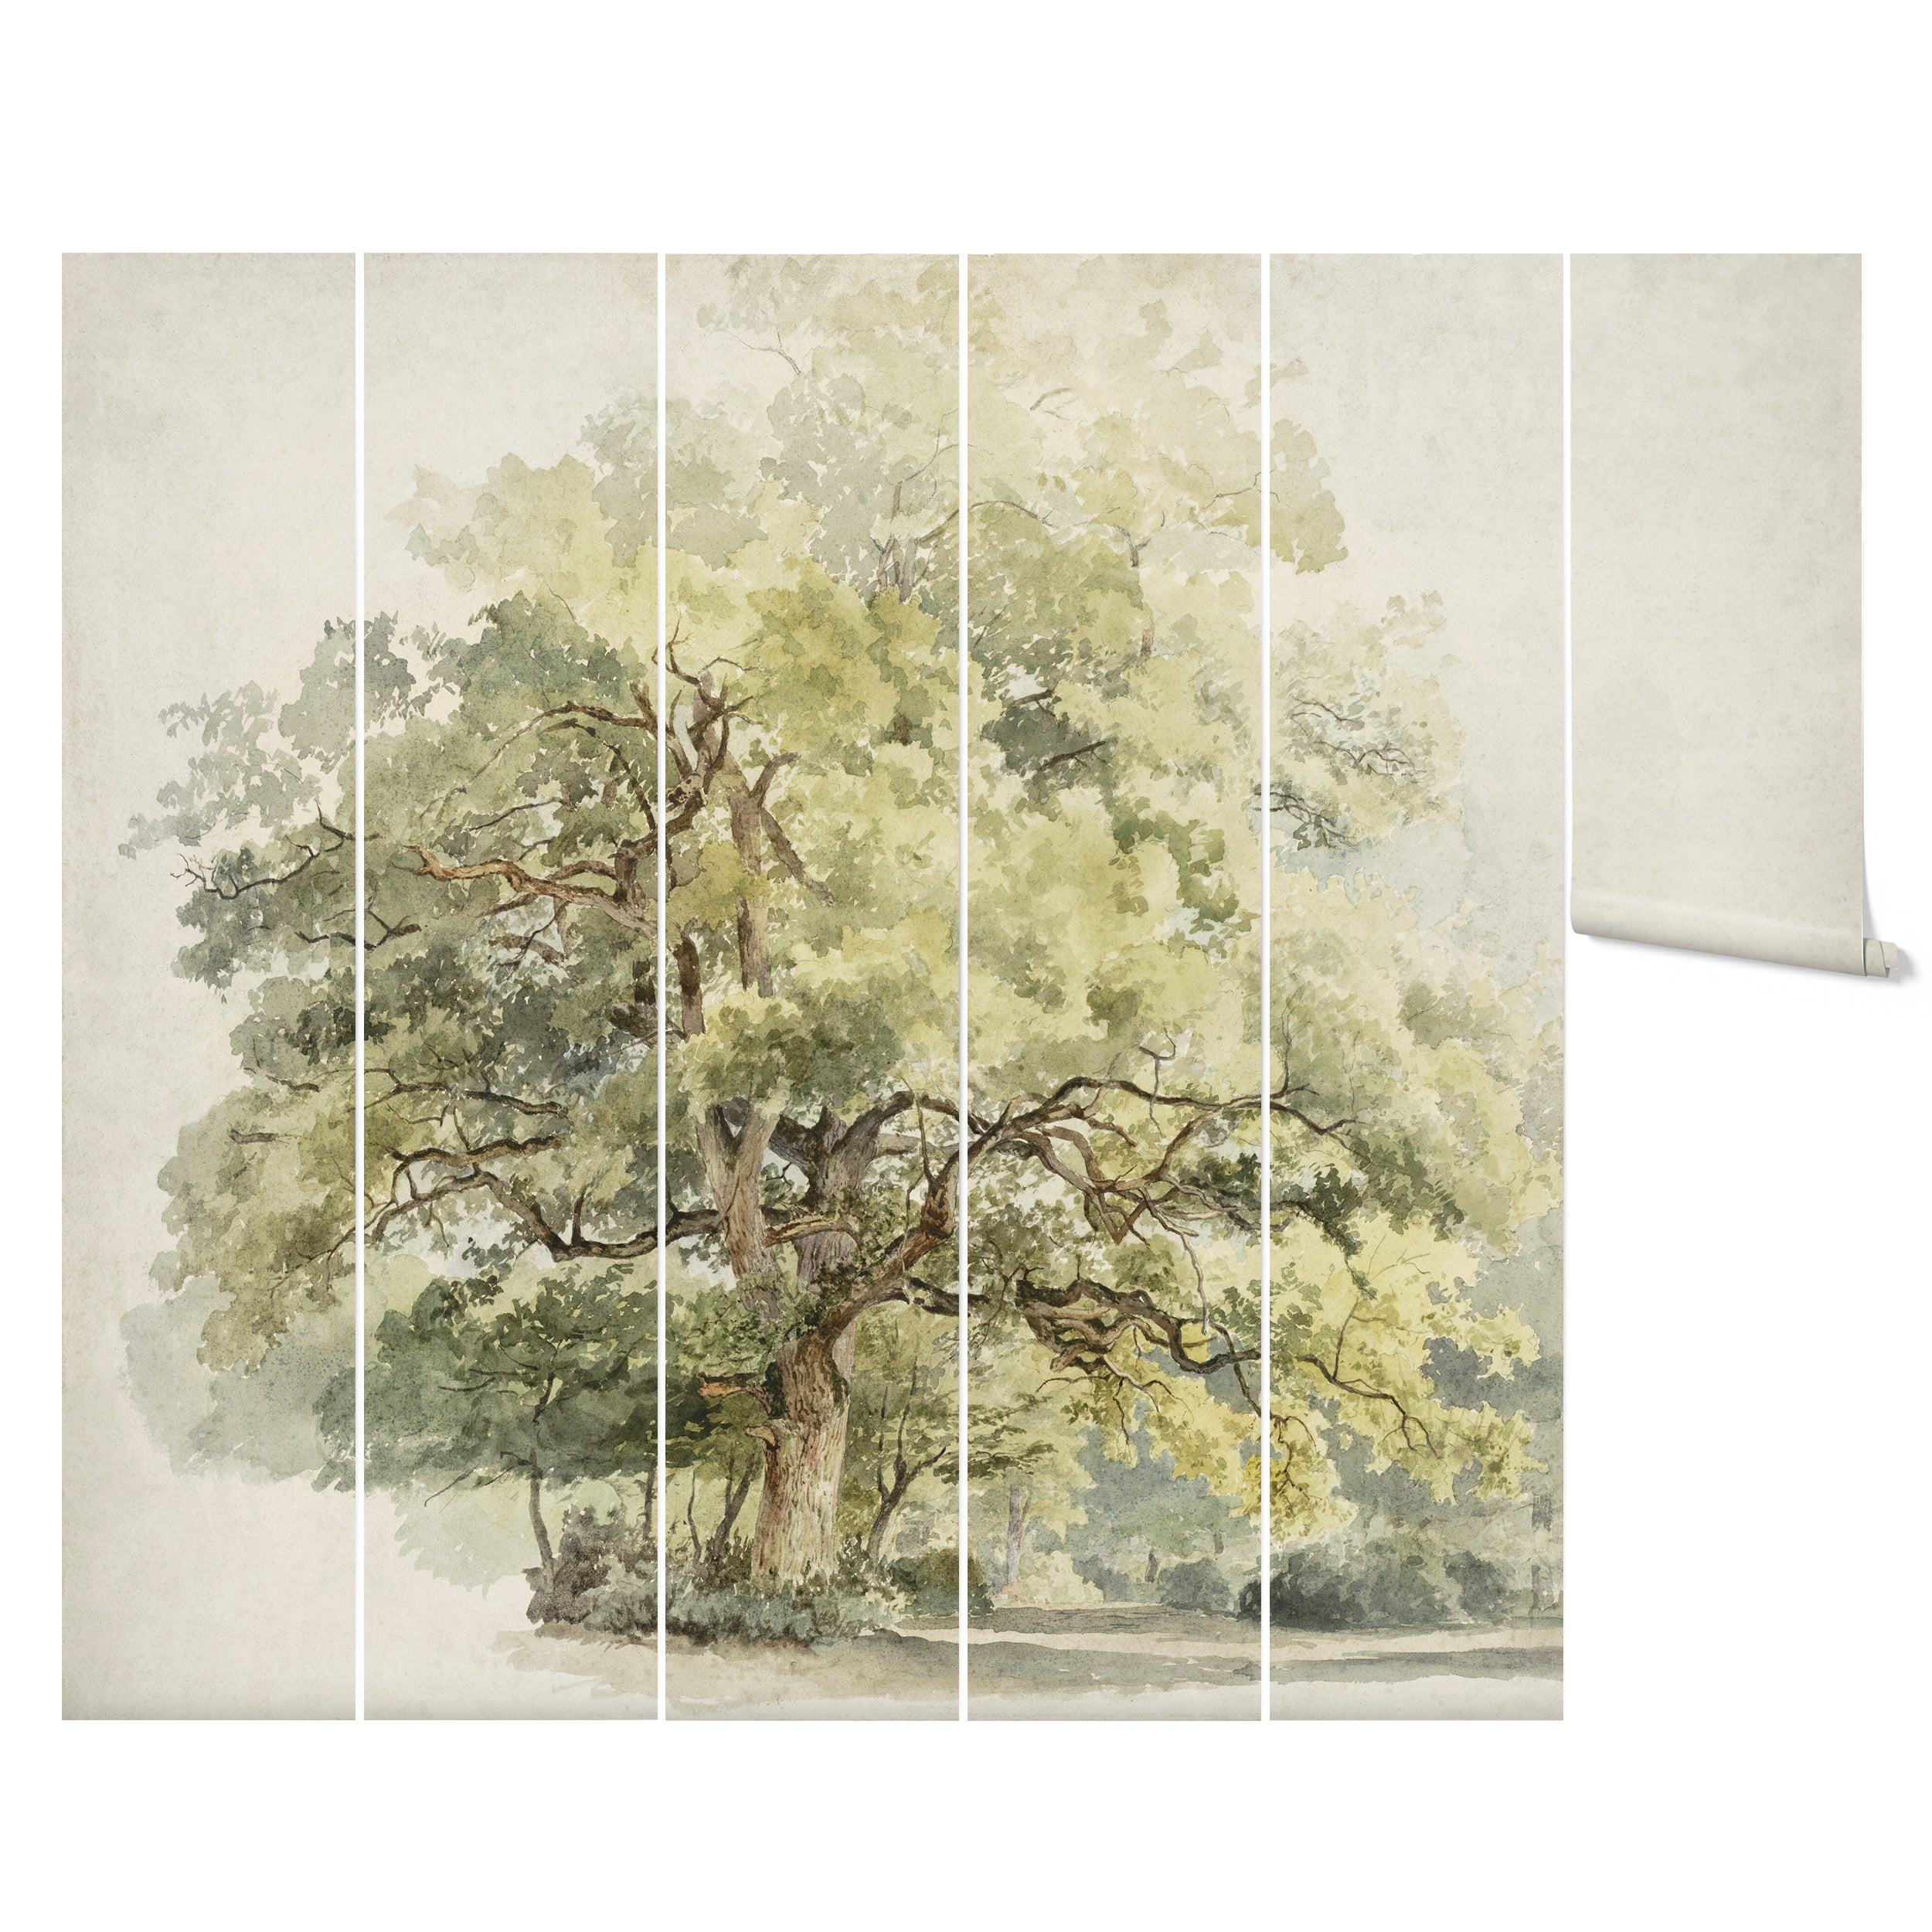 The Boomstudie Vintage Wall Mural displayed across six vertical panels, each featuring segments of a large, detailed tree with a variety of green tones. This segmented presentation highlights the artistic and detailed rendering of the tree, suitable for adding a majestic and historic feel to any room.